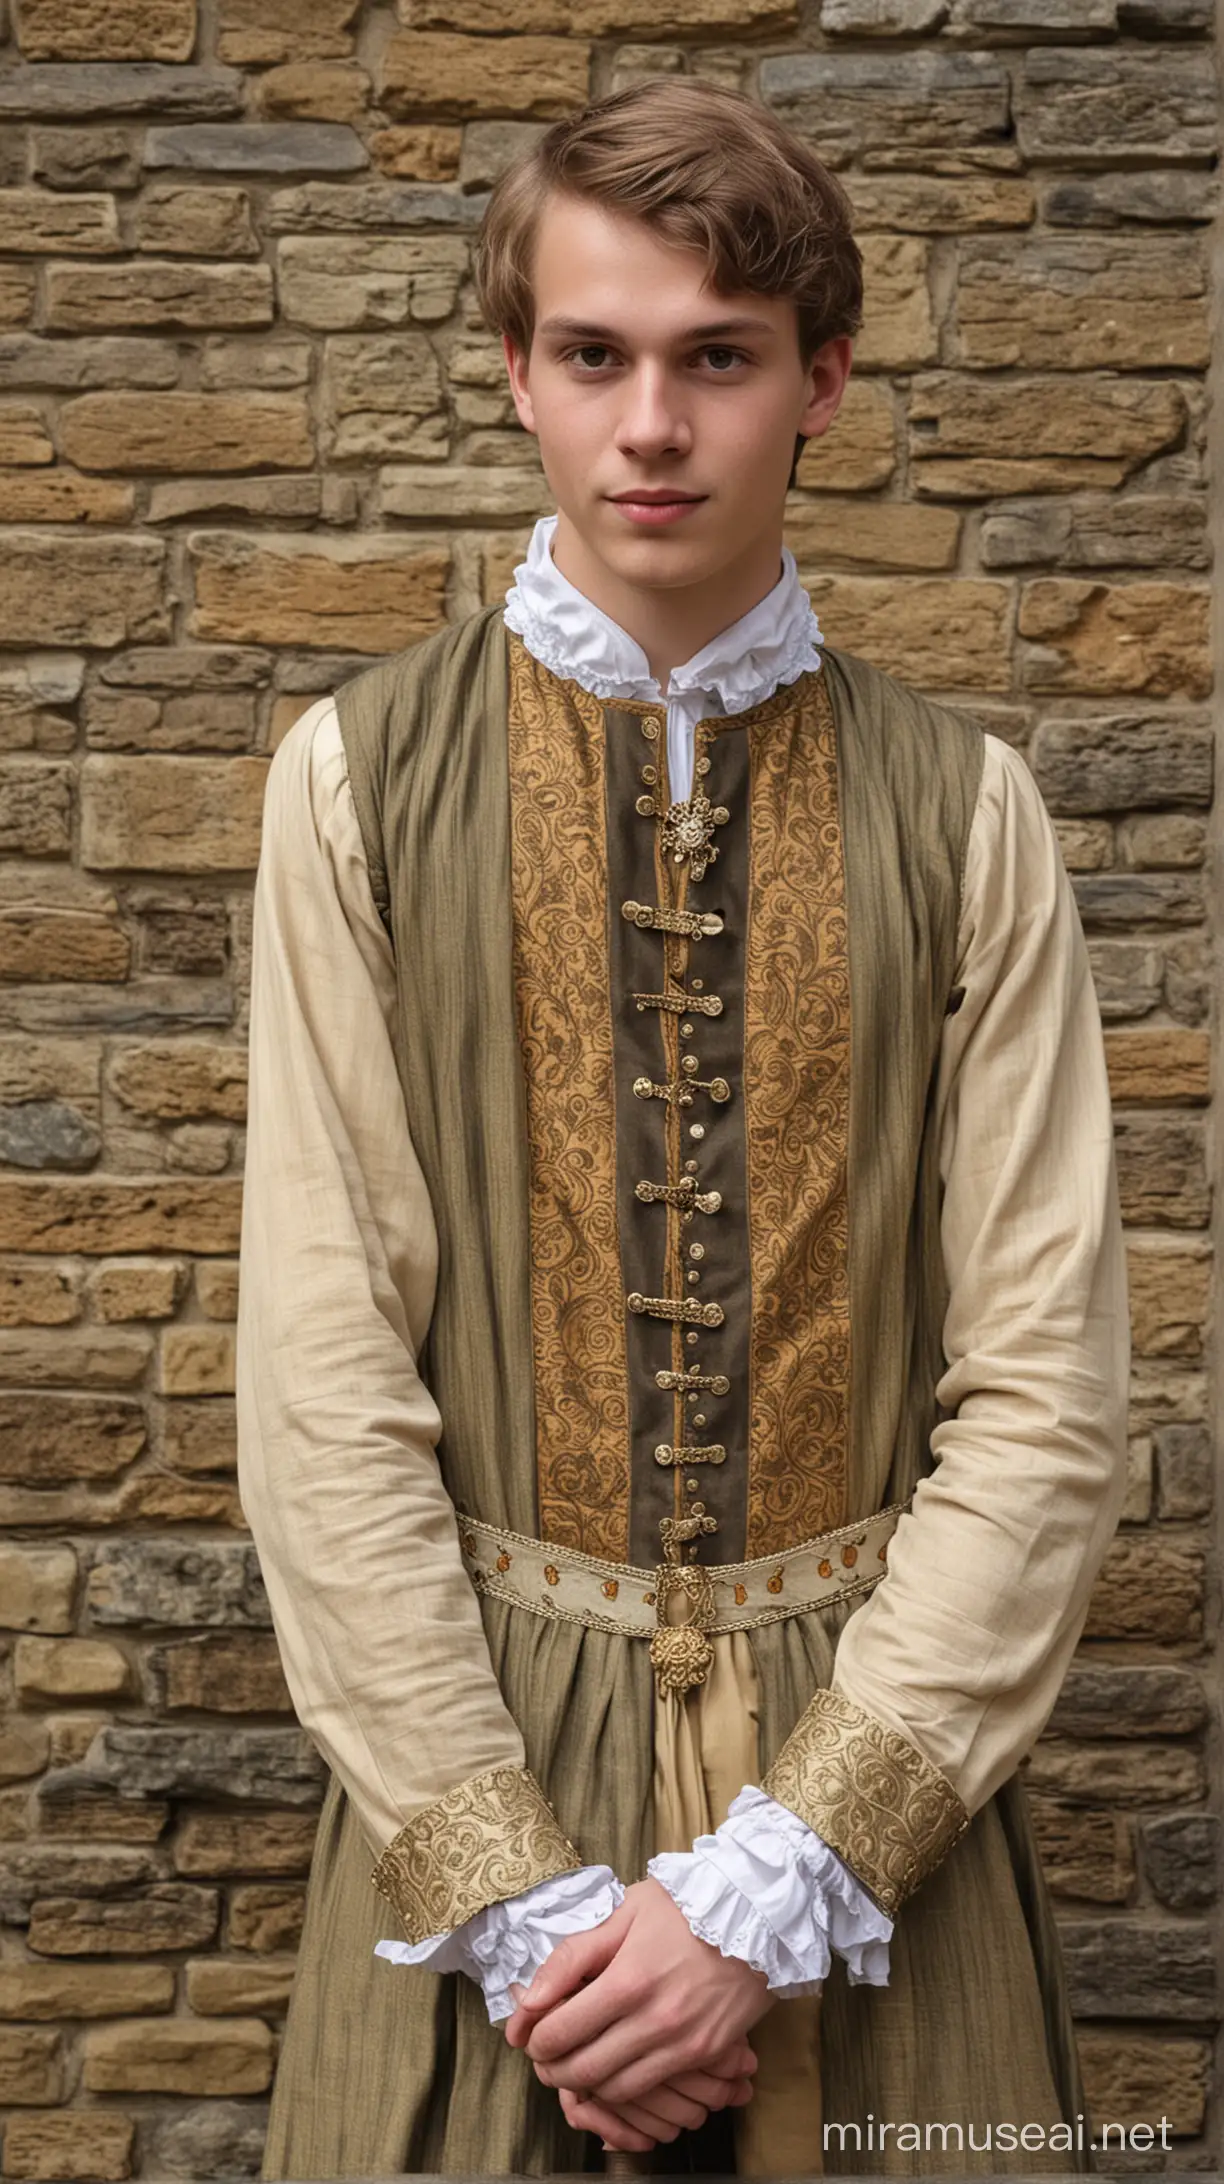 A young man during the tudor times